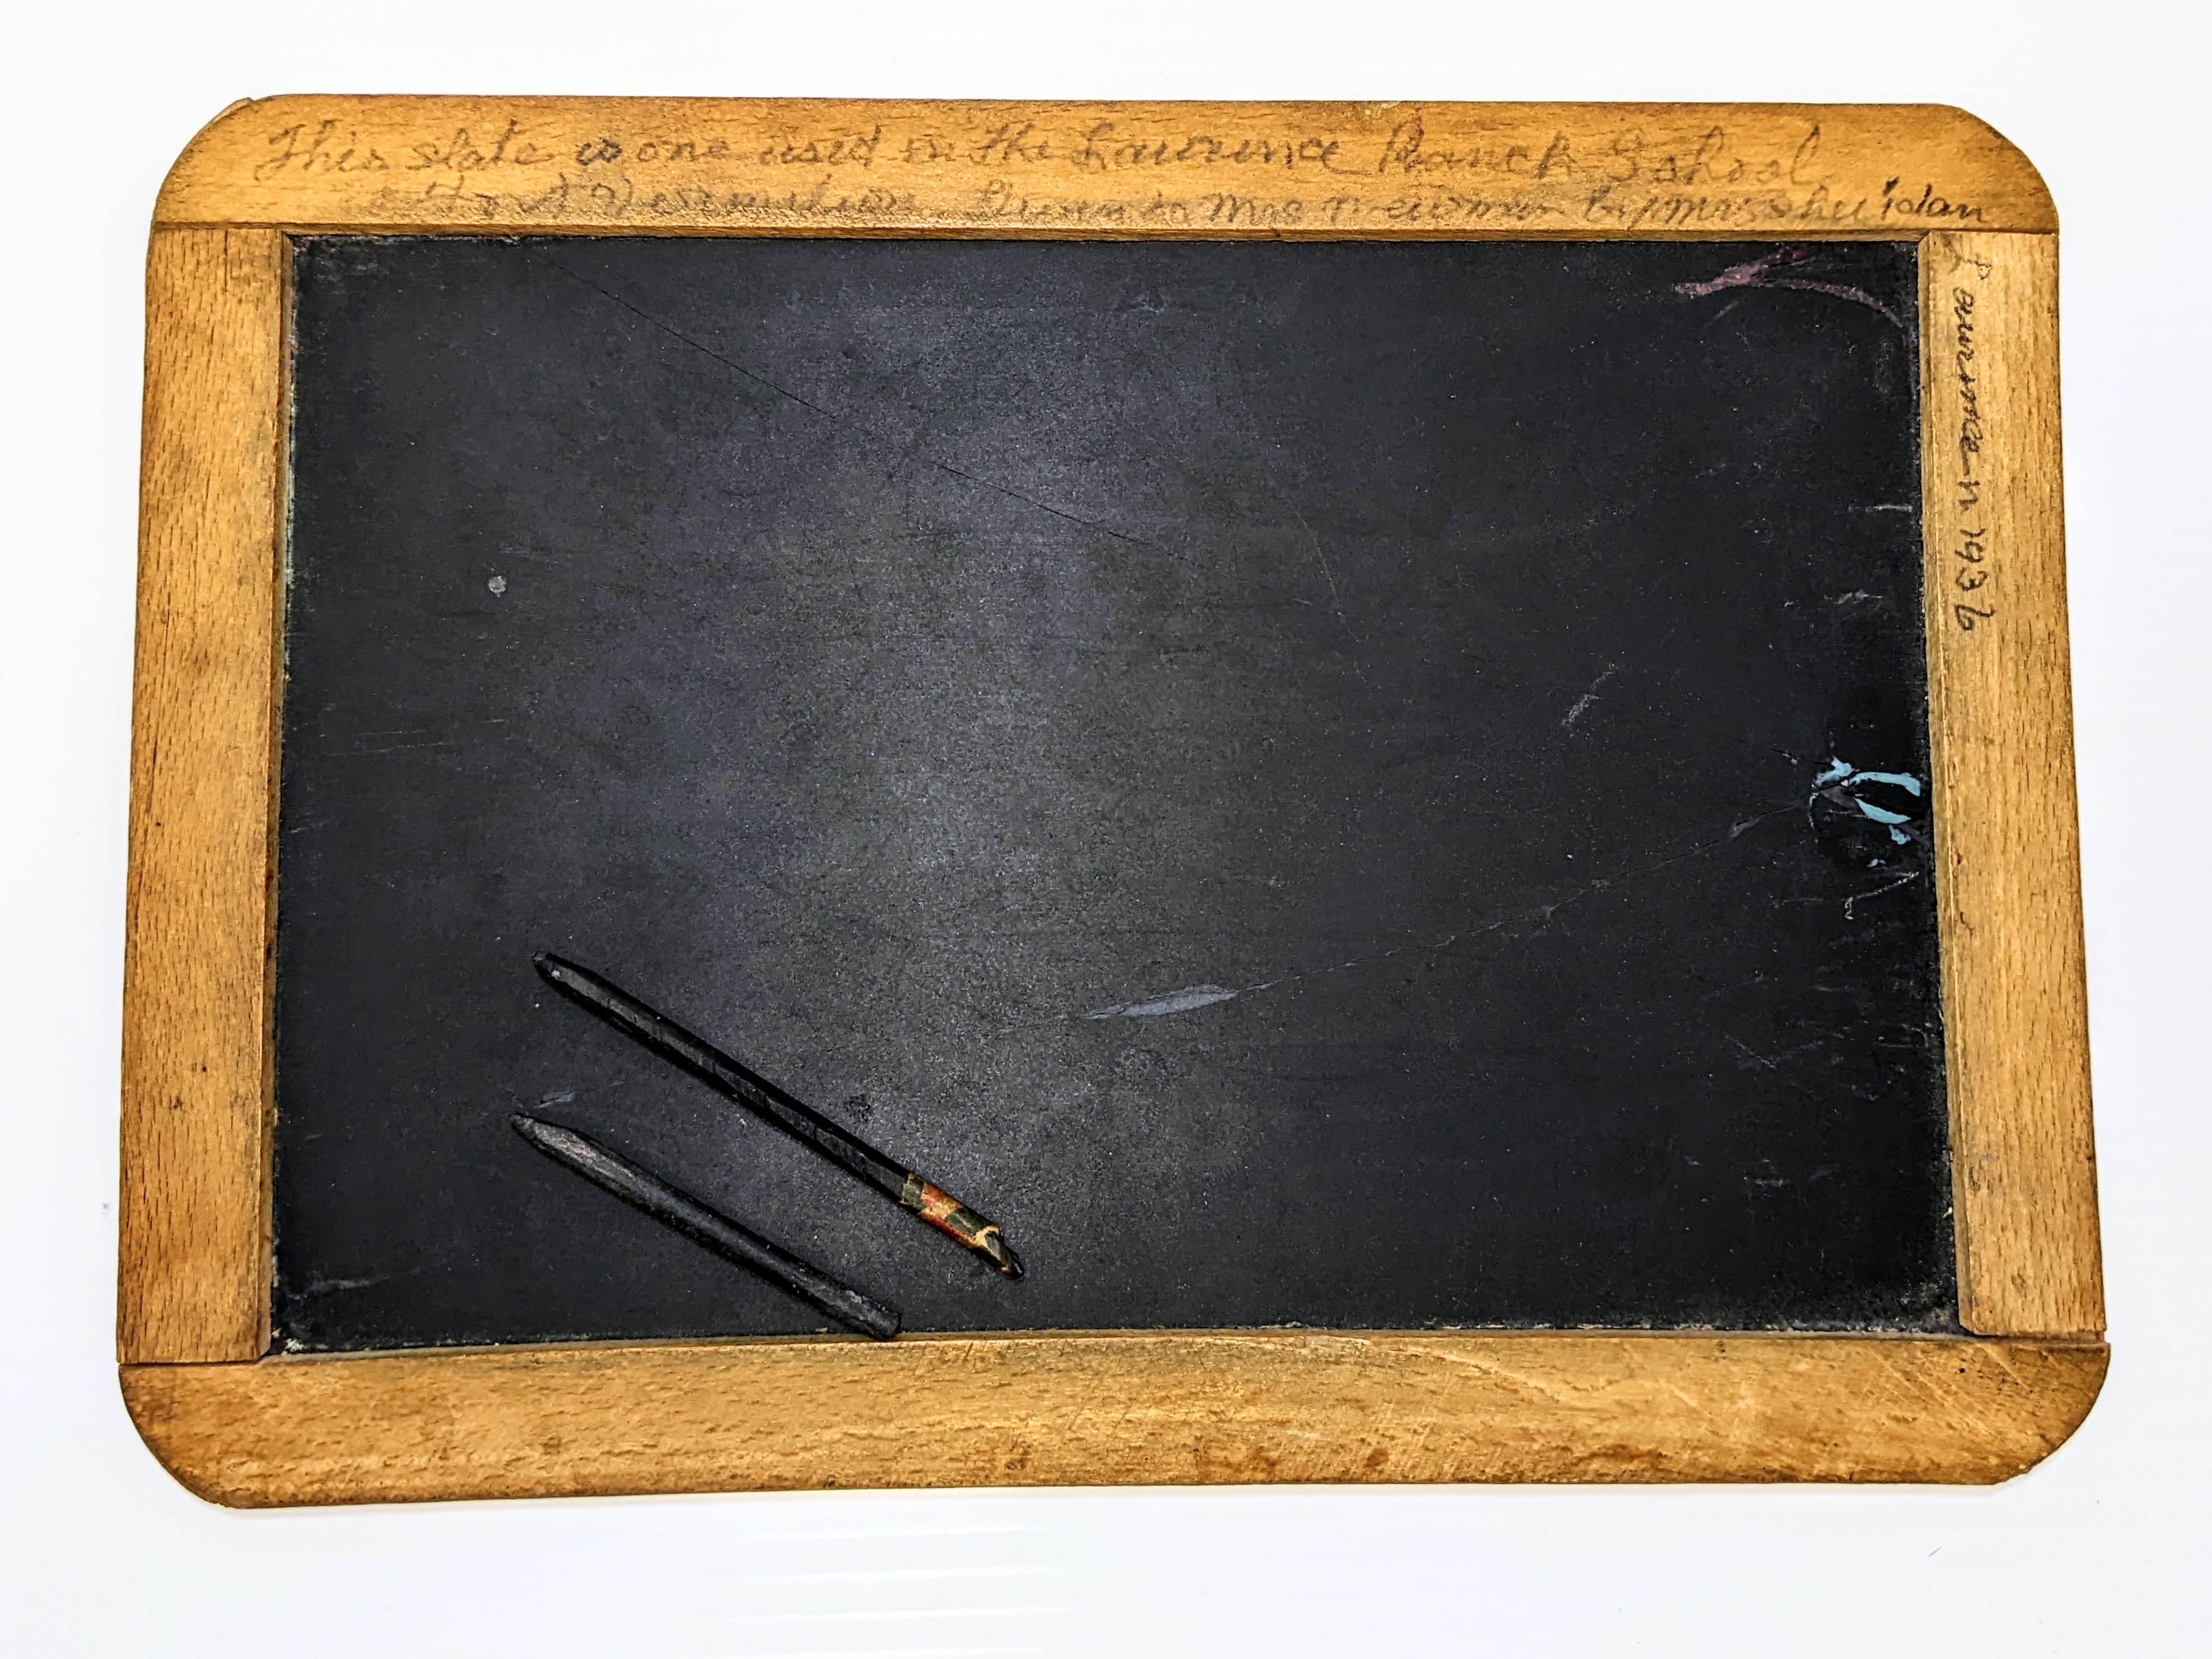 Today is the first day back to school! As such, we have chosen this slate board and pencils as the Artifact of the week! Once used at the Lawrence Ranch school - a slate like this would be used to practice writing, solving math problems- and no doubt- doodling. Paper was expensive and re-useable boards such as this one were much more economic and viable. They also required great memorization as one would have to wipe it clean to create more practice space as they continued through the lesson. Furthermore slateboards often stayed at school - meaning there was no opportunity to study at home and one had to have determined focus during the lesson! The lawrence Ranch school was established in 1913.
2007.67.08.01+02 / Lawrence Family 06/09/2022